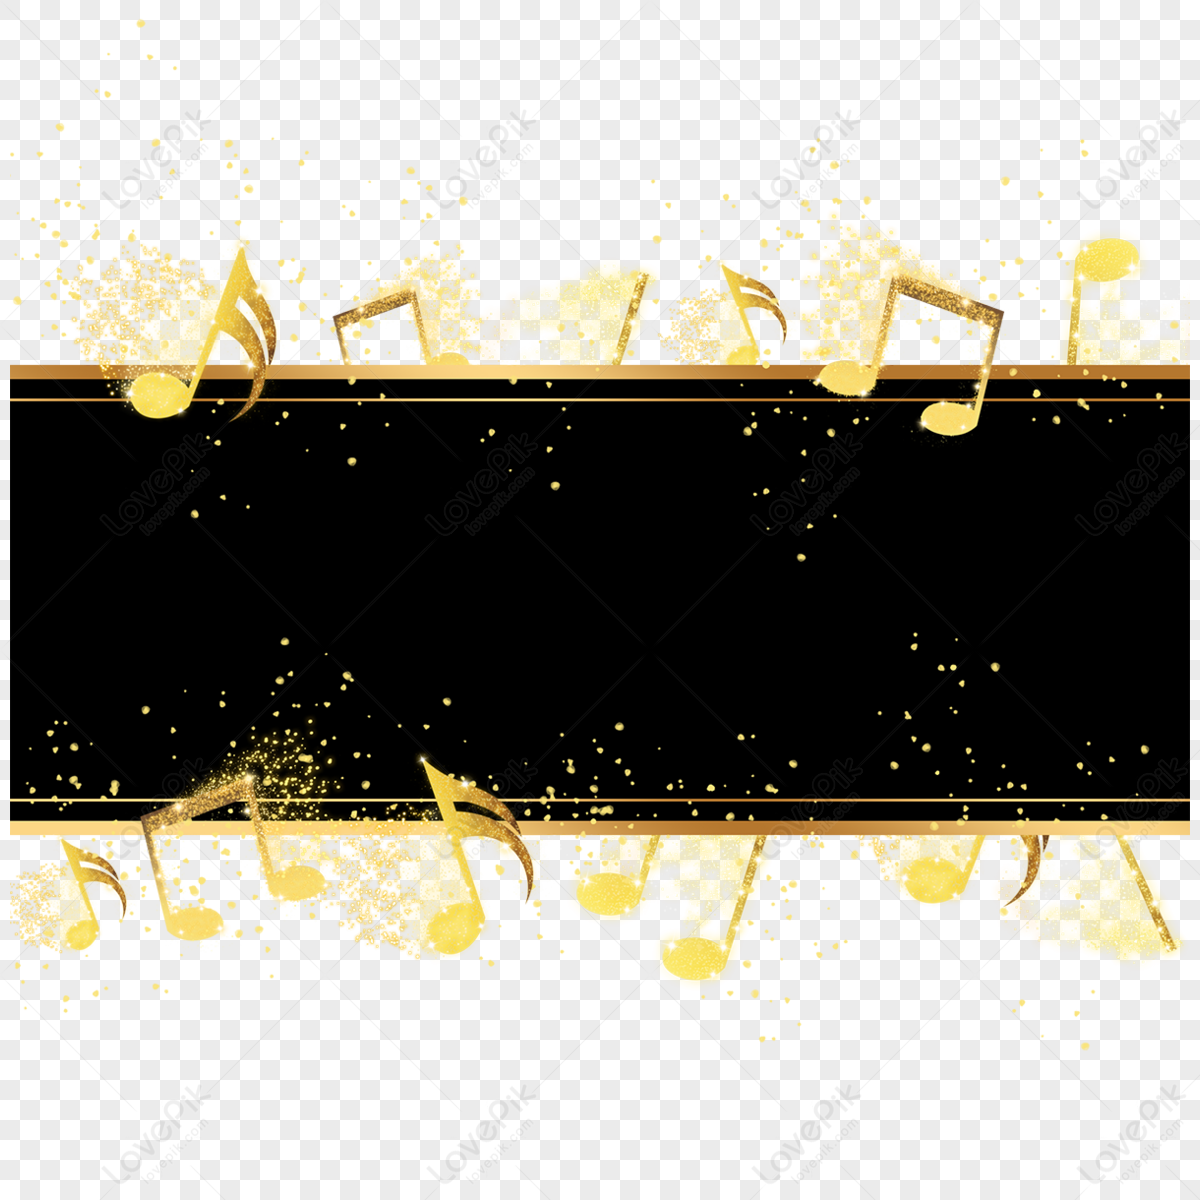 Black Gold Musical Note Music Symbol Gradient Border,musical Notes,gold ...